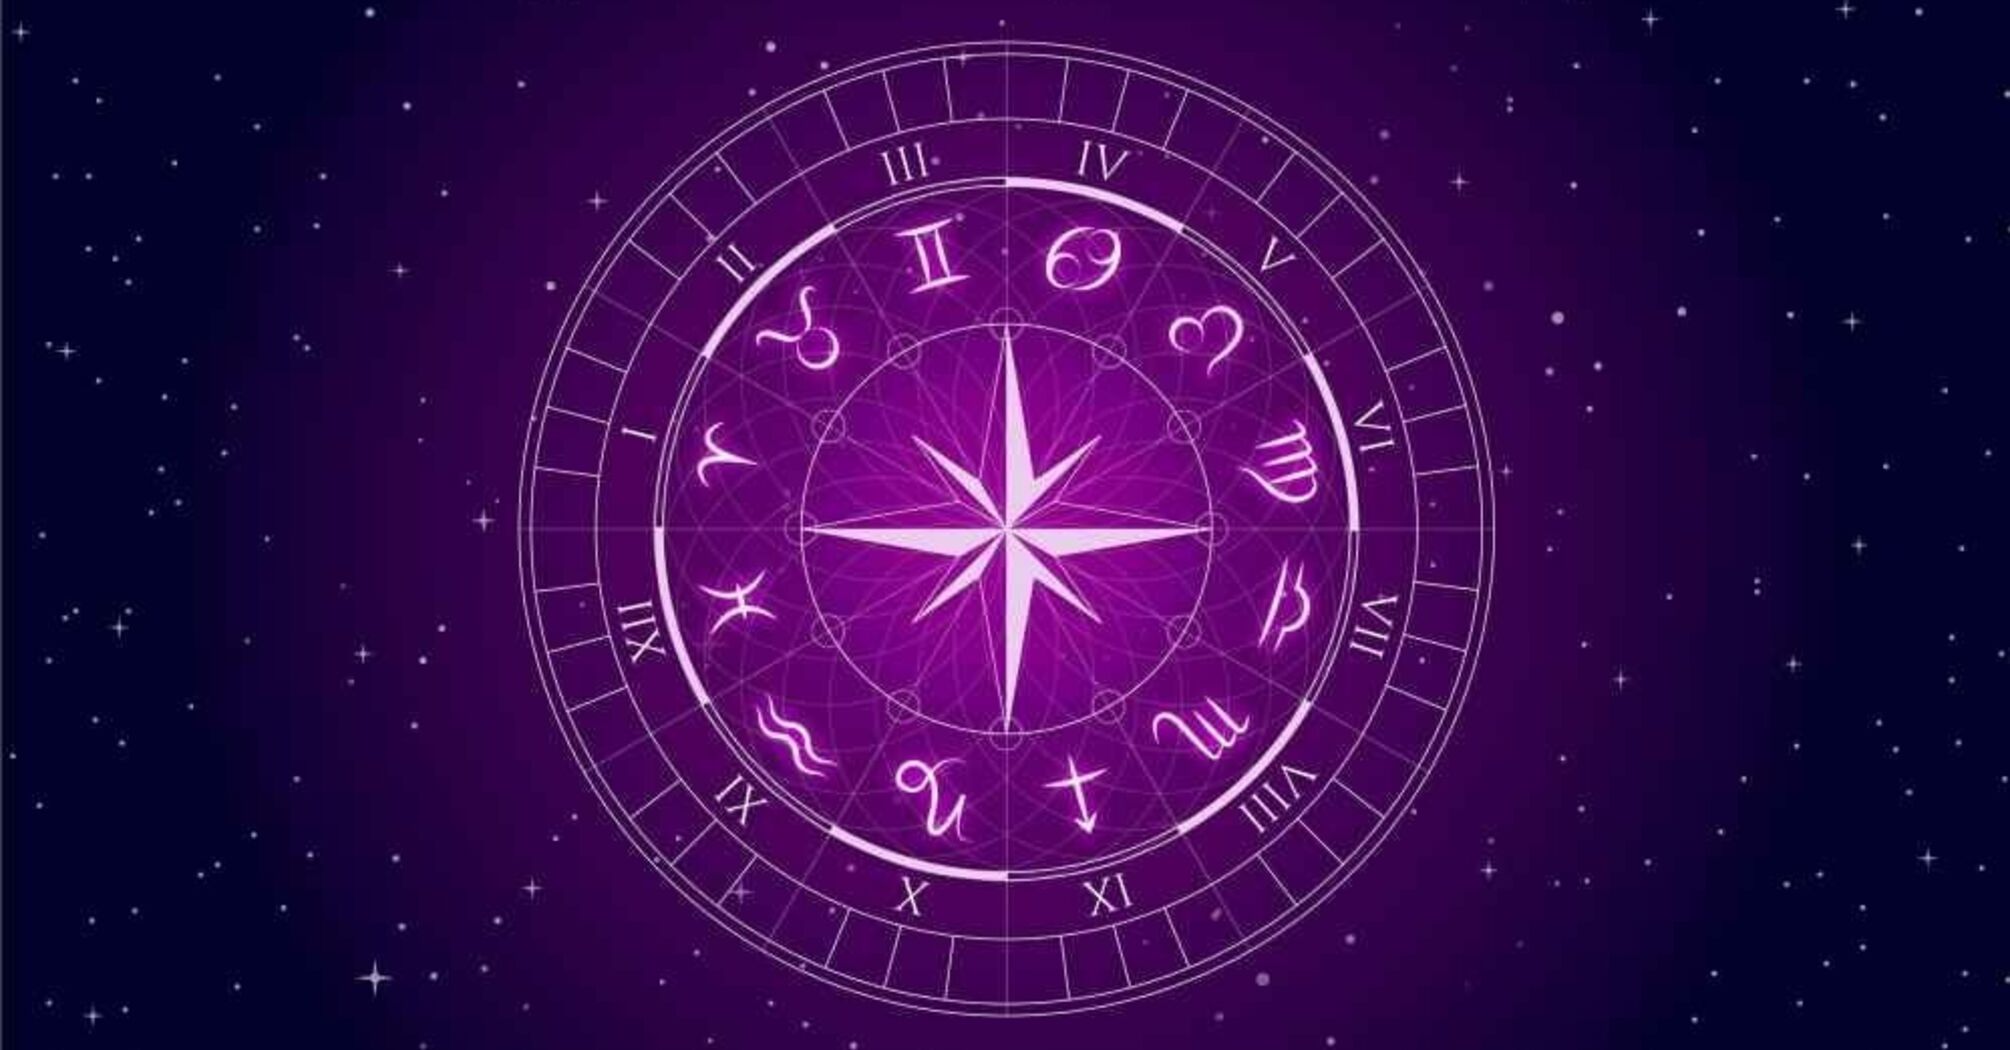 Horoscope for all zodiac signs for January 28: What changes are coming